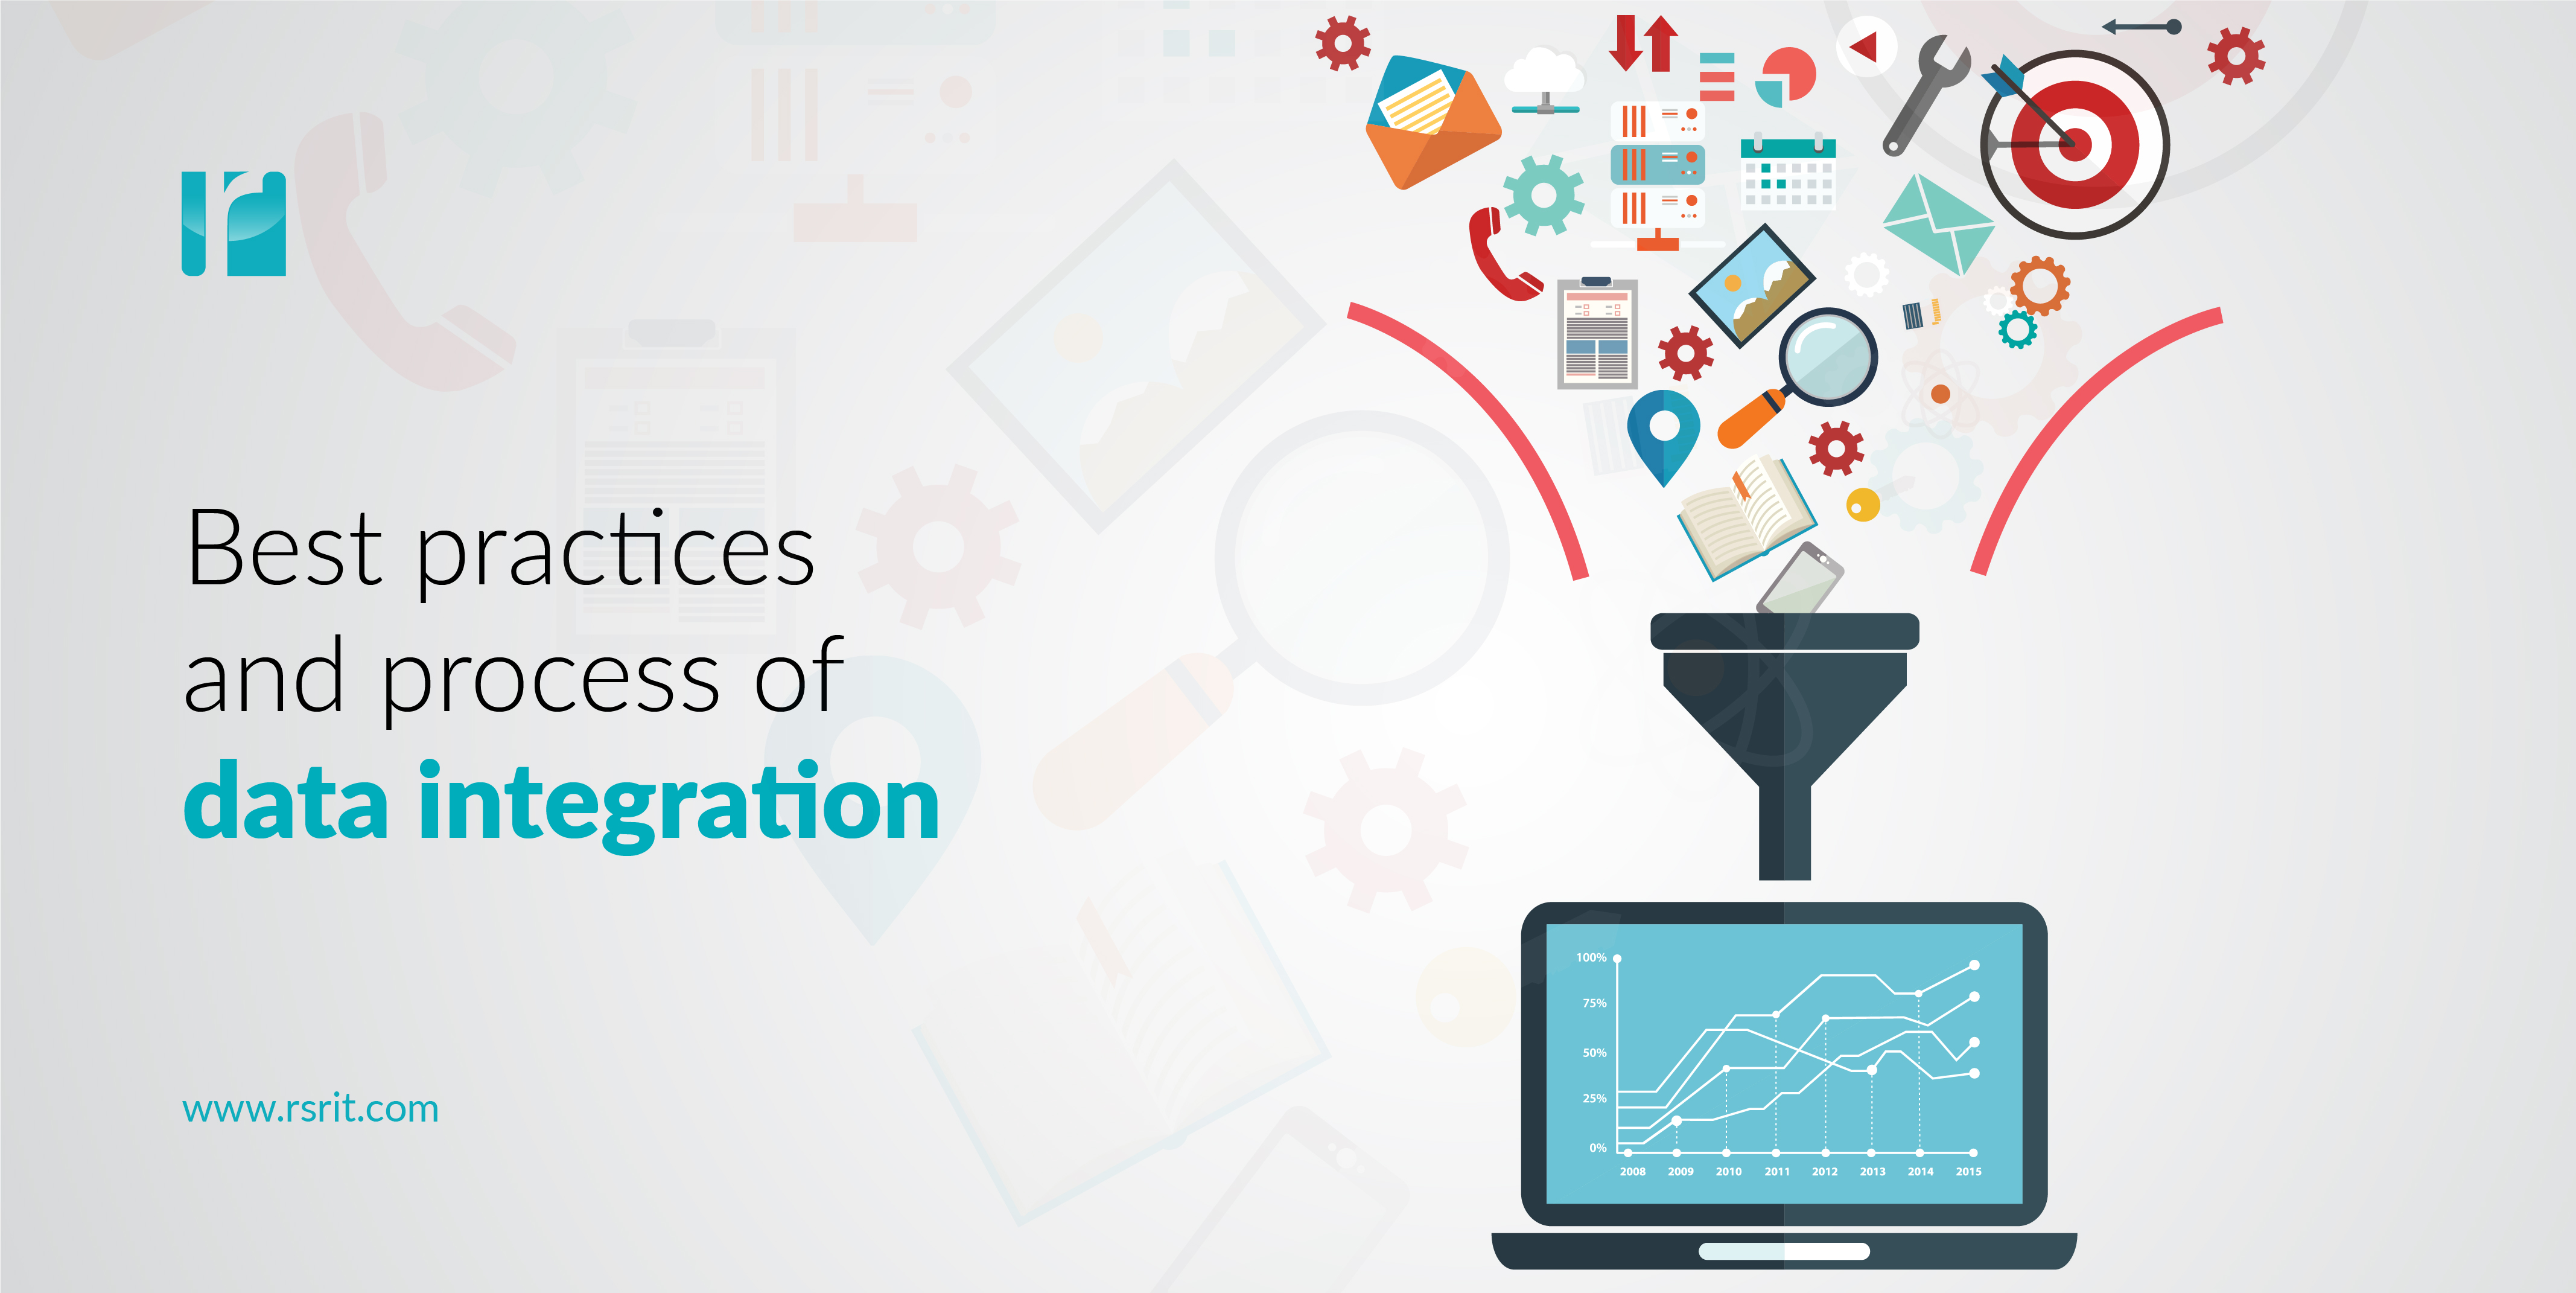 Best practices and process of data integration